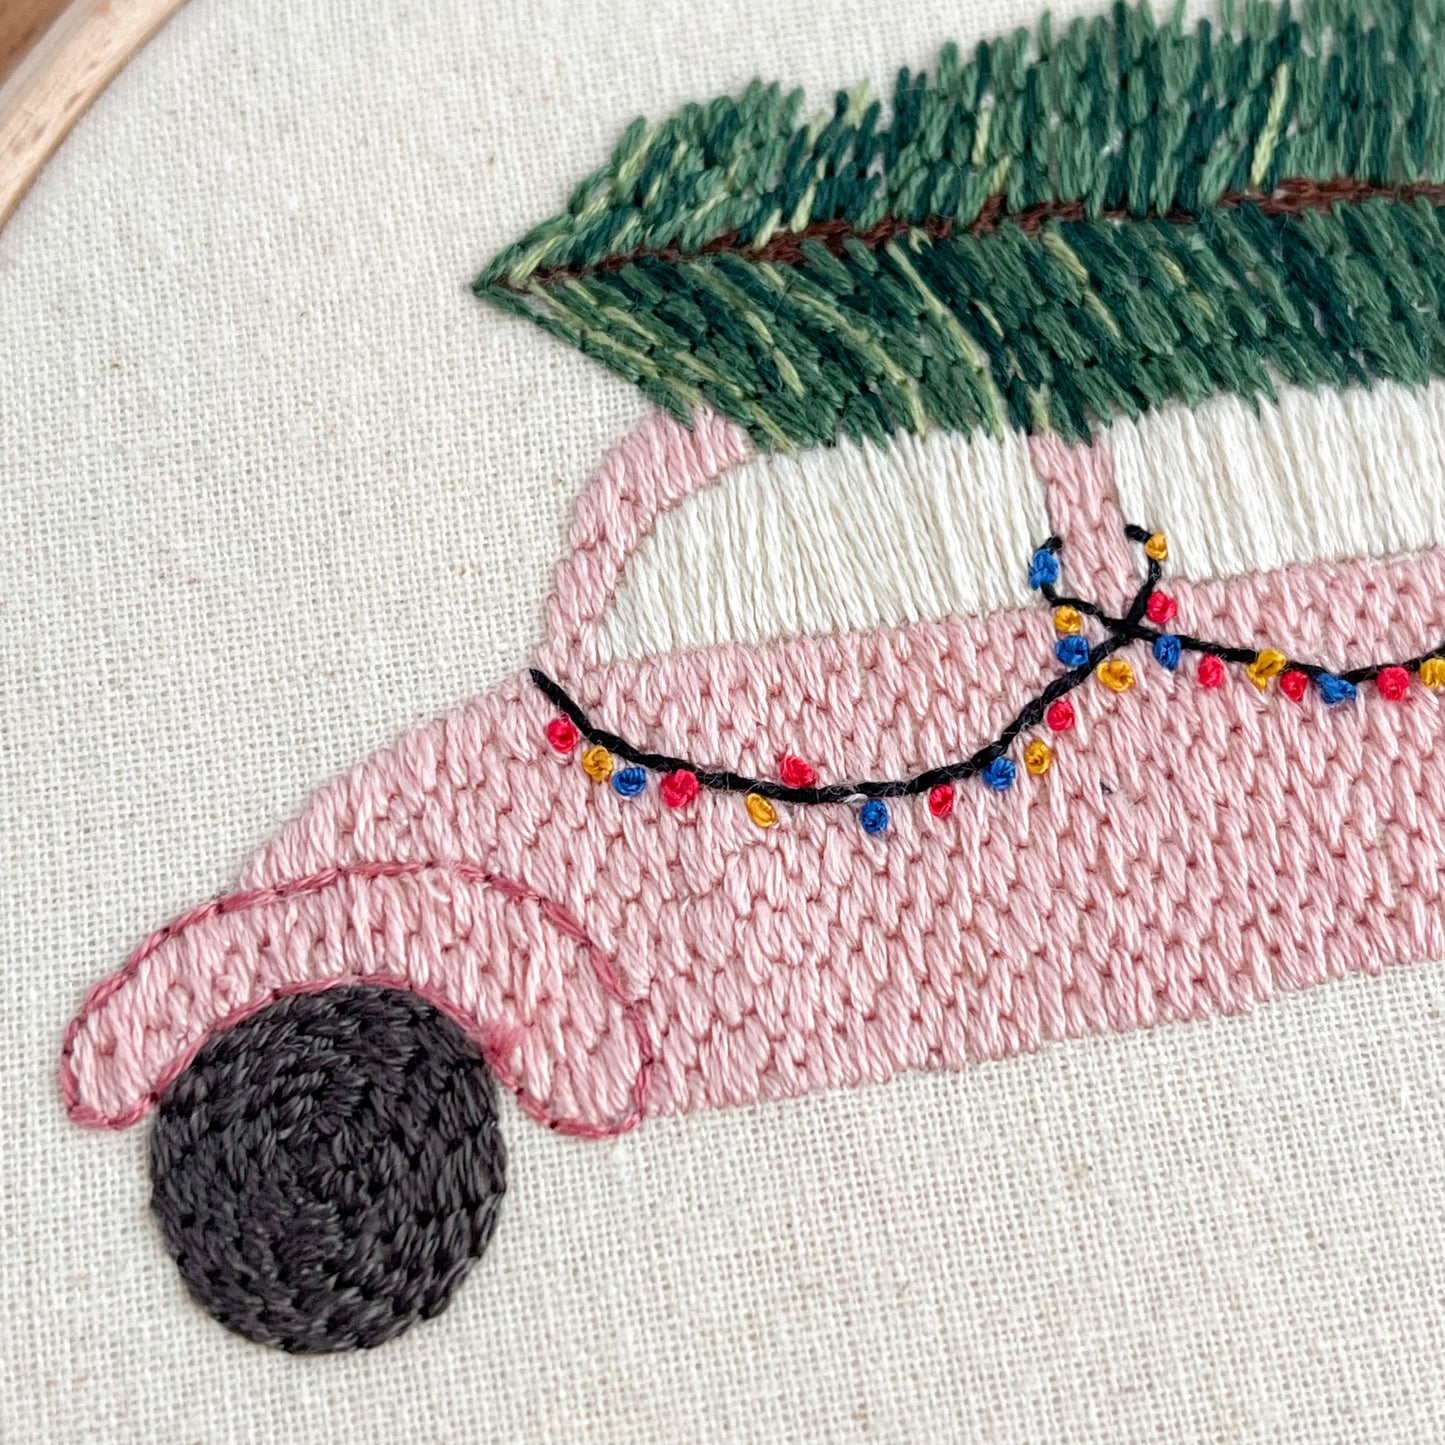 Christmas Car Embroidery PDF Pattern